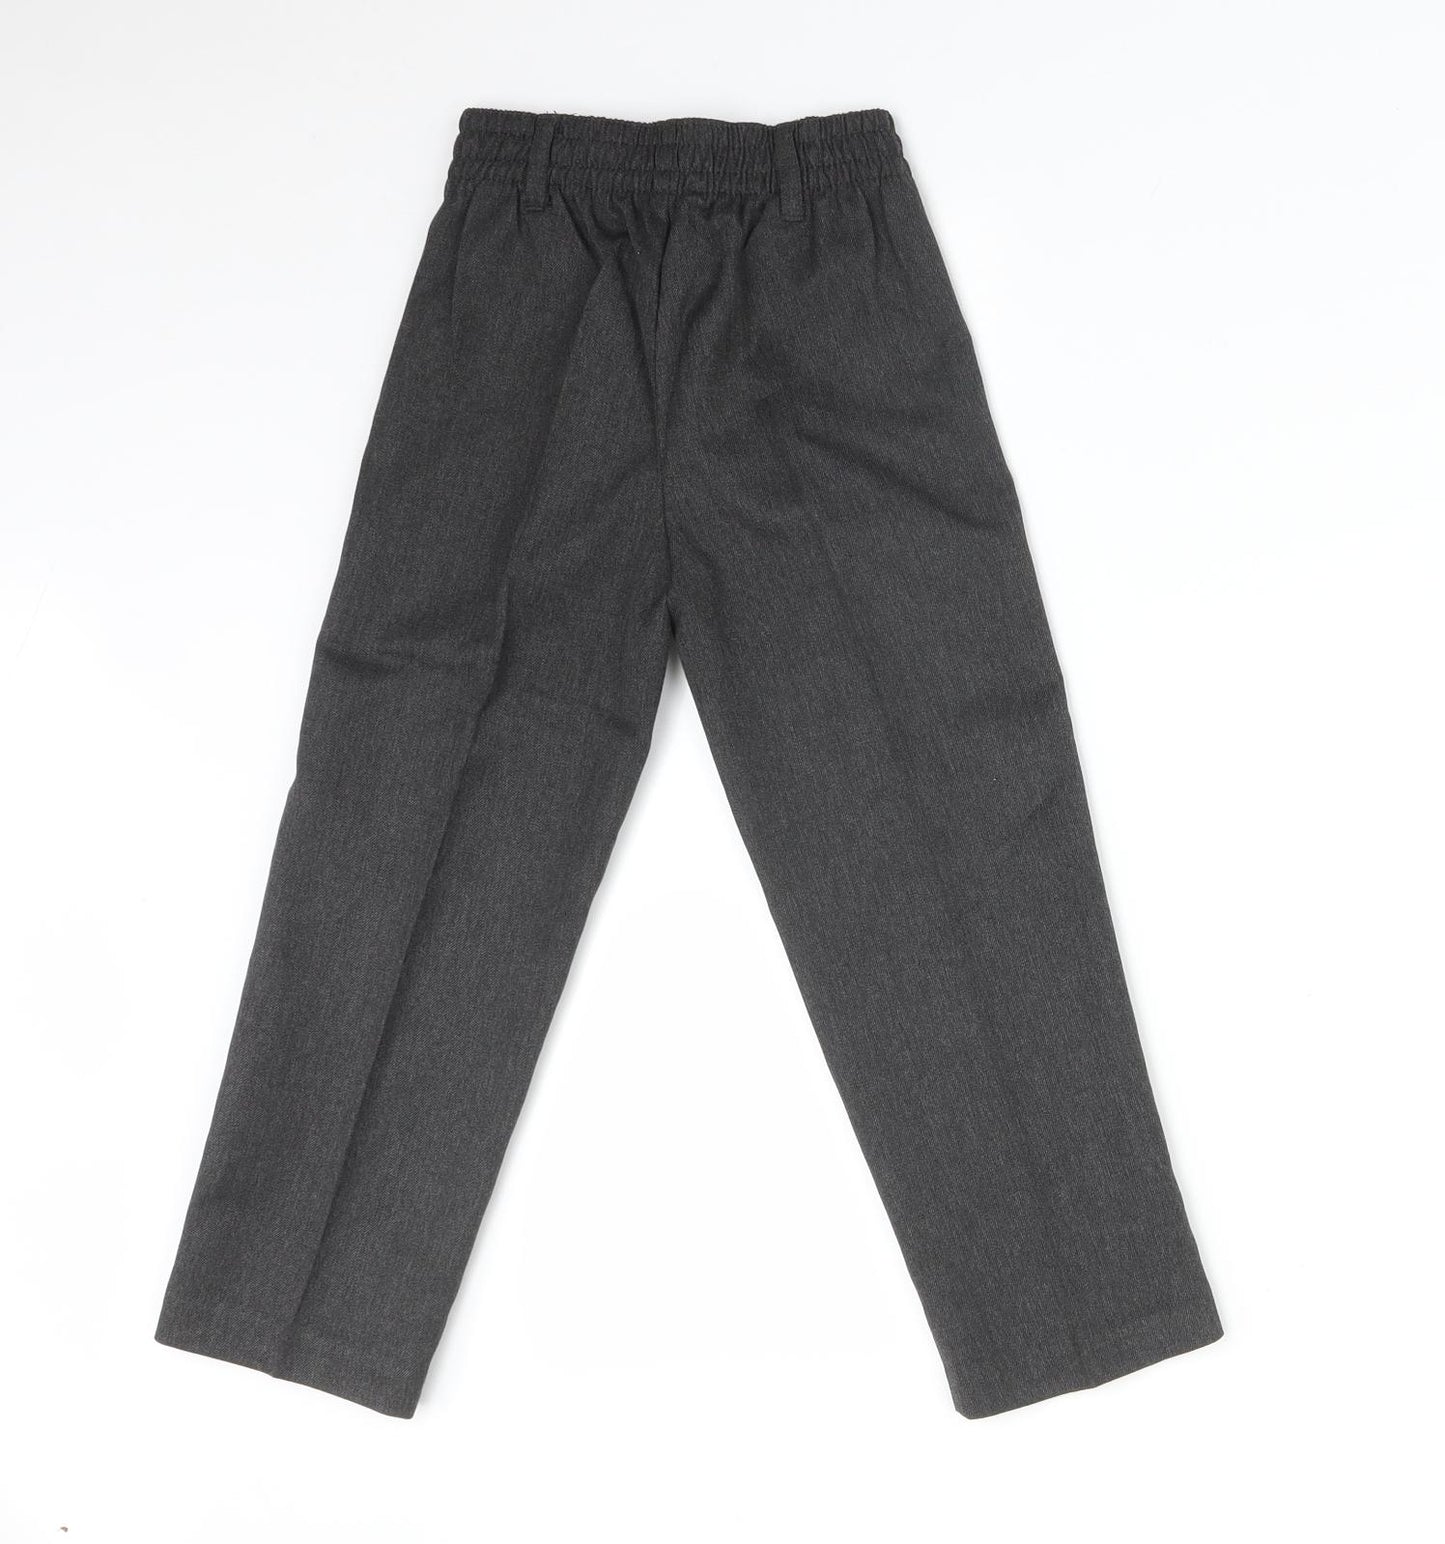 BACK TO SCHOOL Boys Grey  Polyester Dress Pants Trousers Size 4-5 Years  Regular